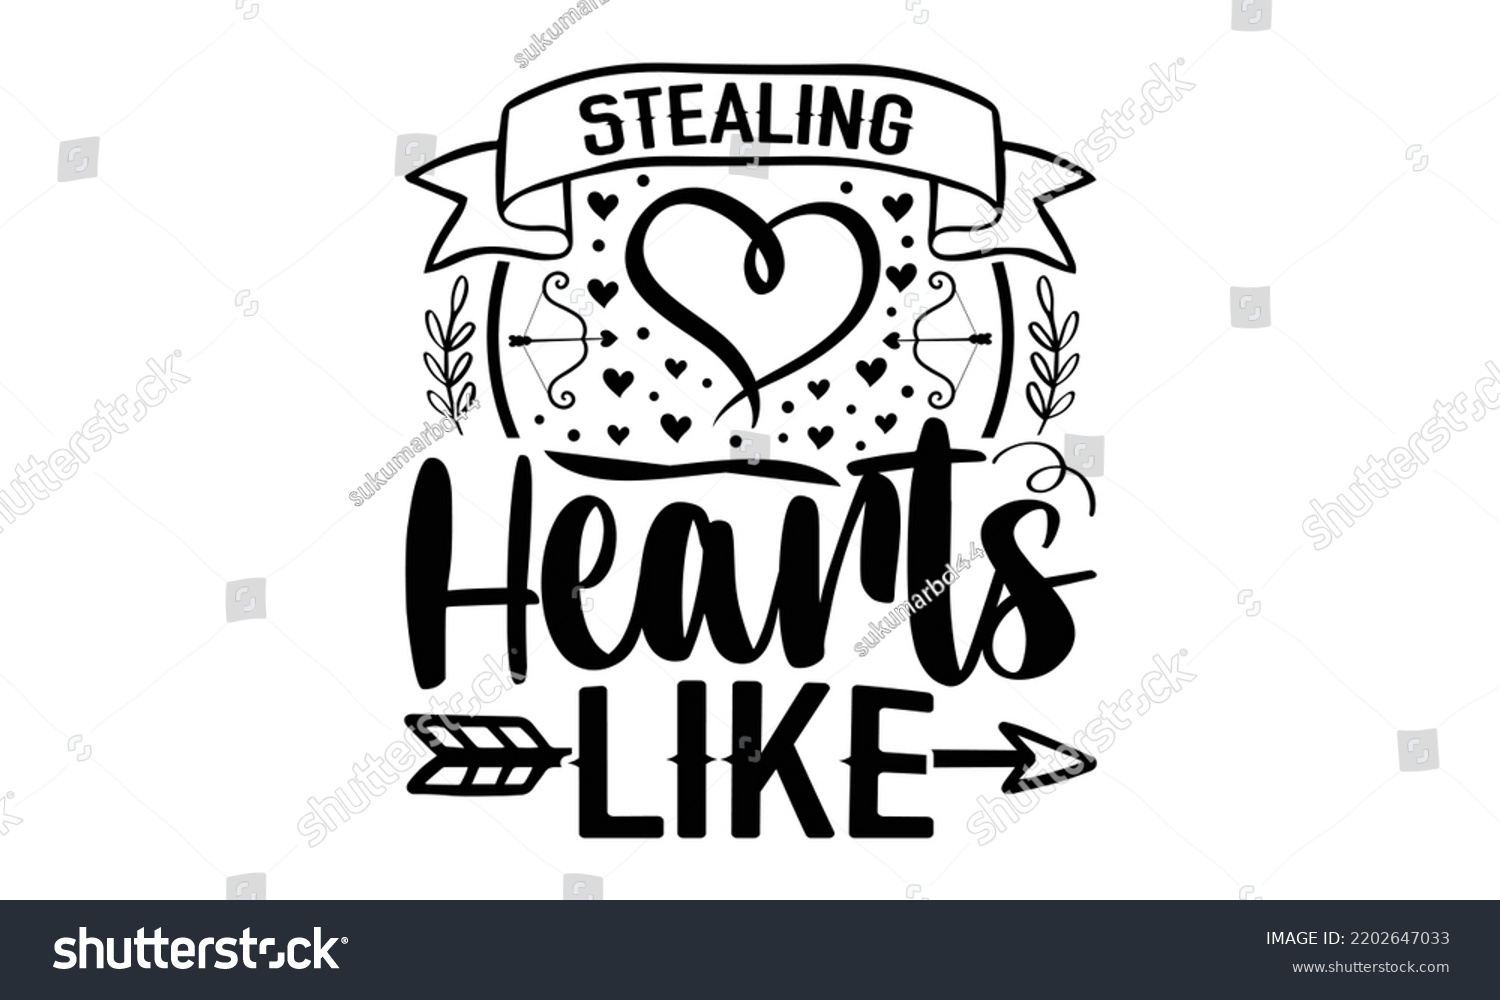 SVG of Stealing Hearts Like - Valentine's Day t shirt design, Hand drawn lettering phrase isolated on white background, Valentine's Day 2023 quotes svg design. svg